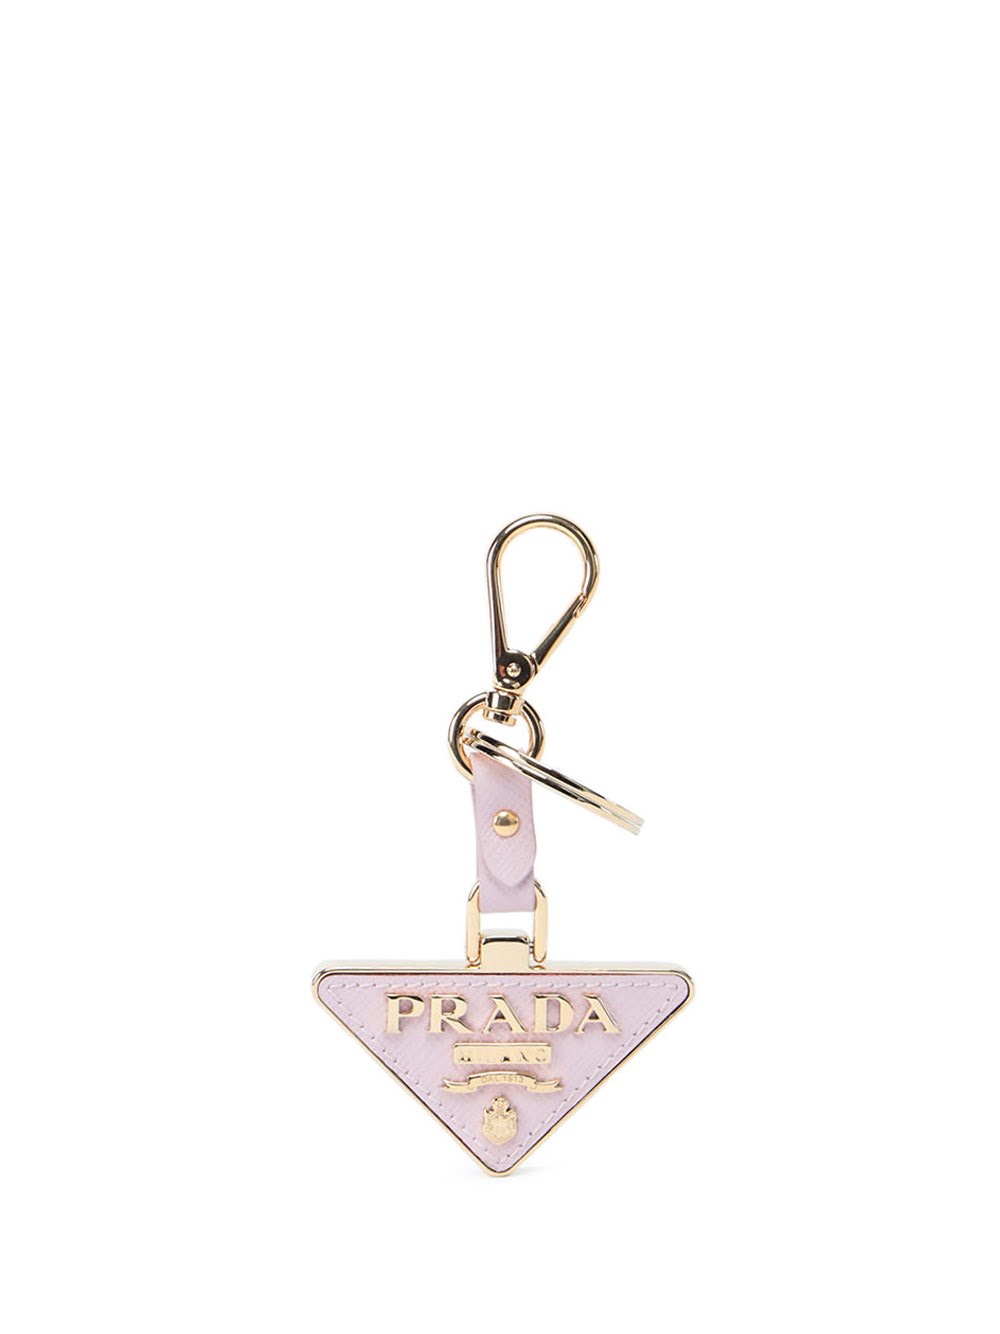 Prada Saffiano Leather And Metal Key Chain In Pink